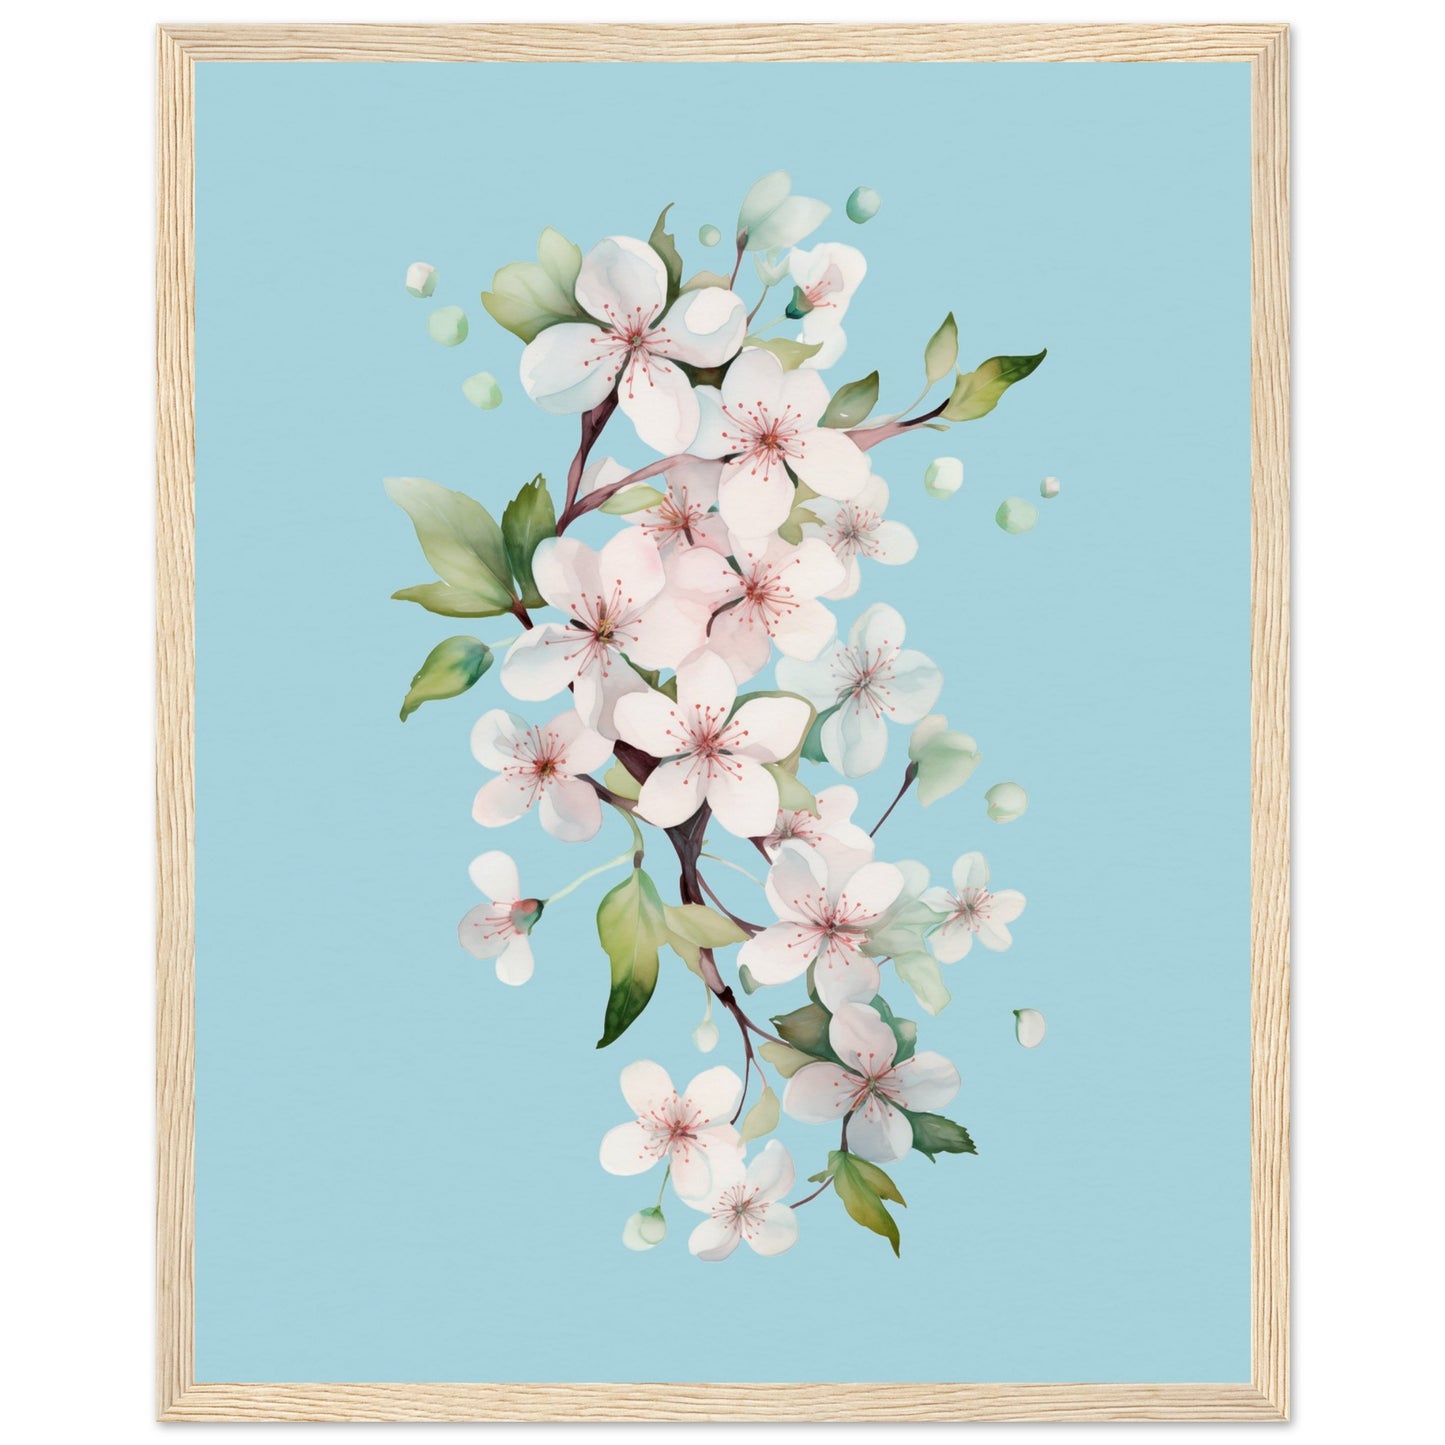 CHERRY BLOSSOMS No. 1 in BLUE BACKGROUND - in Museum-Quality Matte Paper Wooden Framed Poster